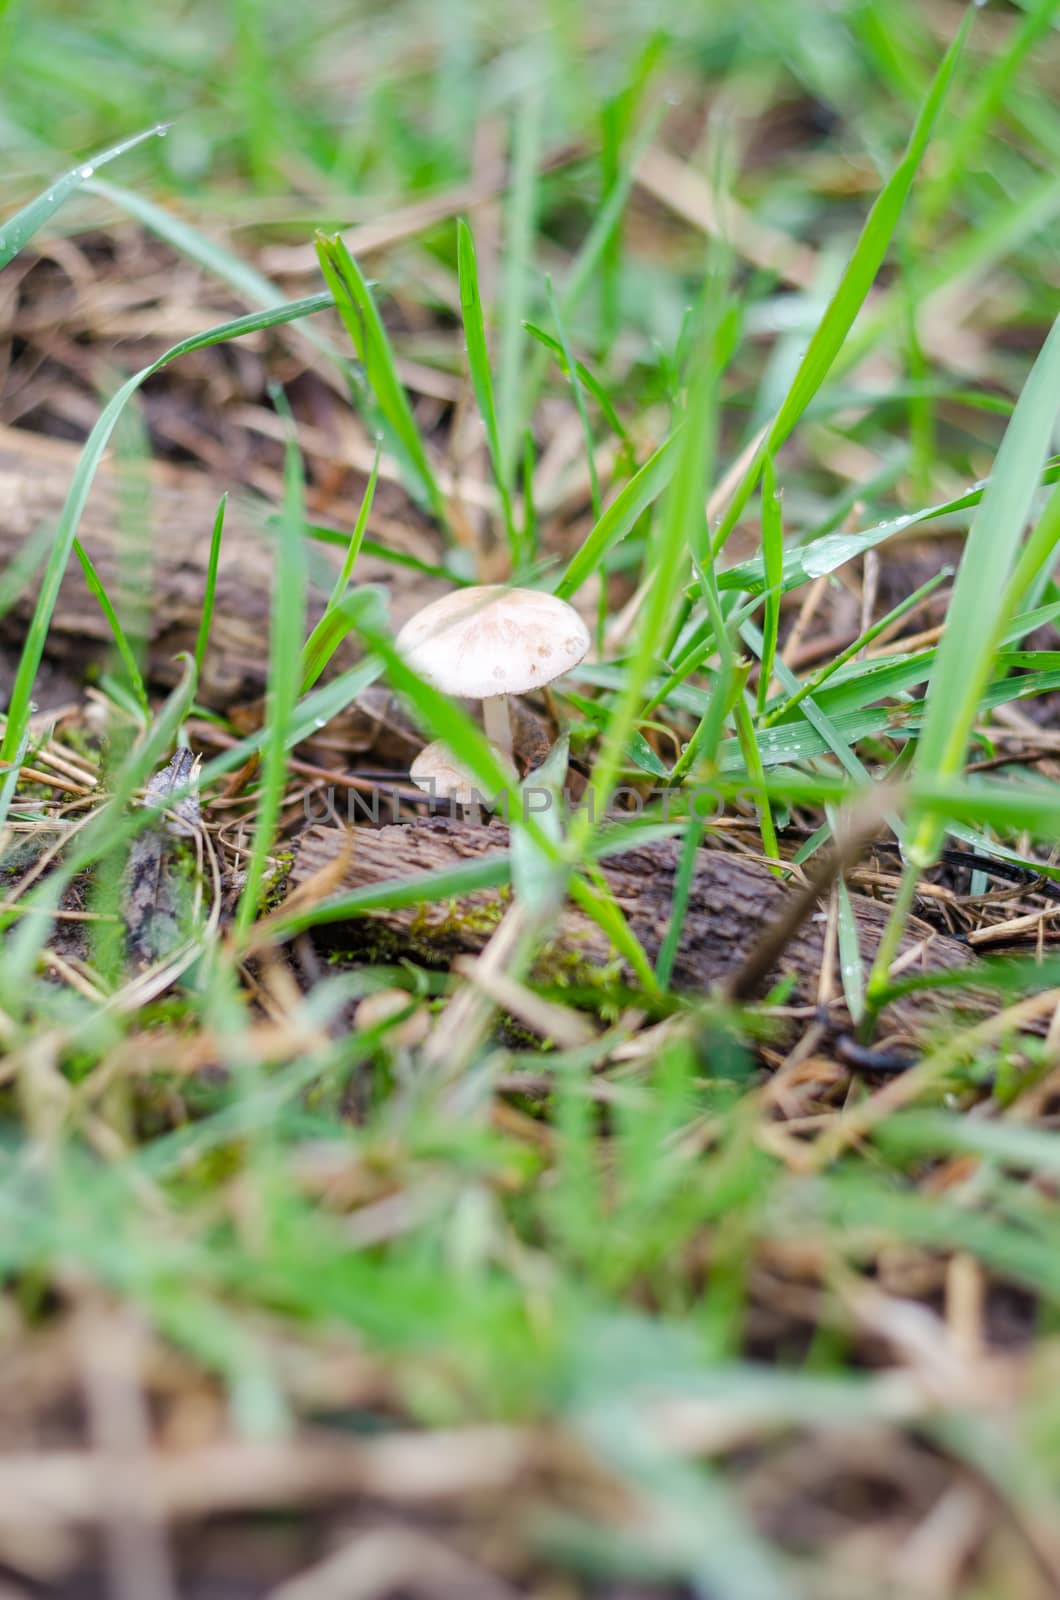 Mushroom in the green grass in the spring after the rain by goody460